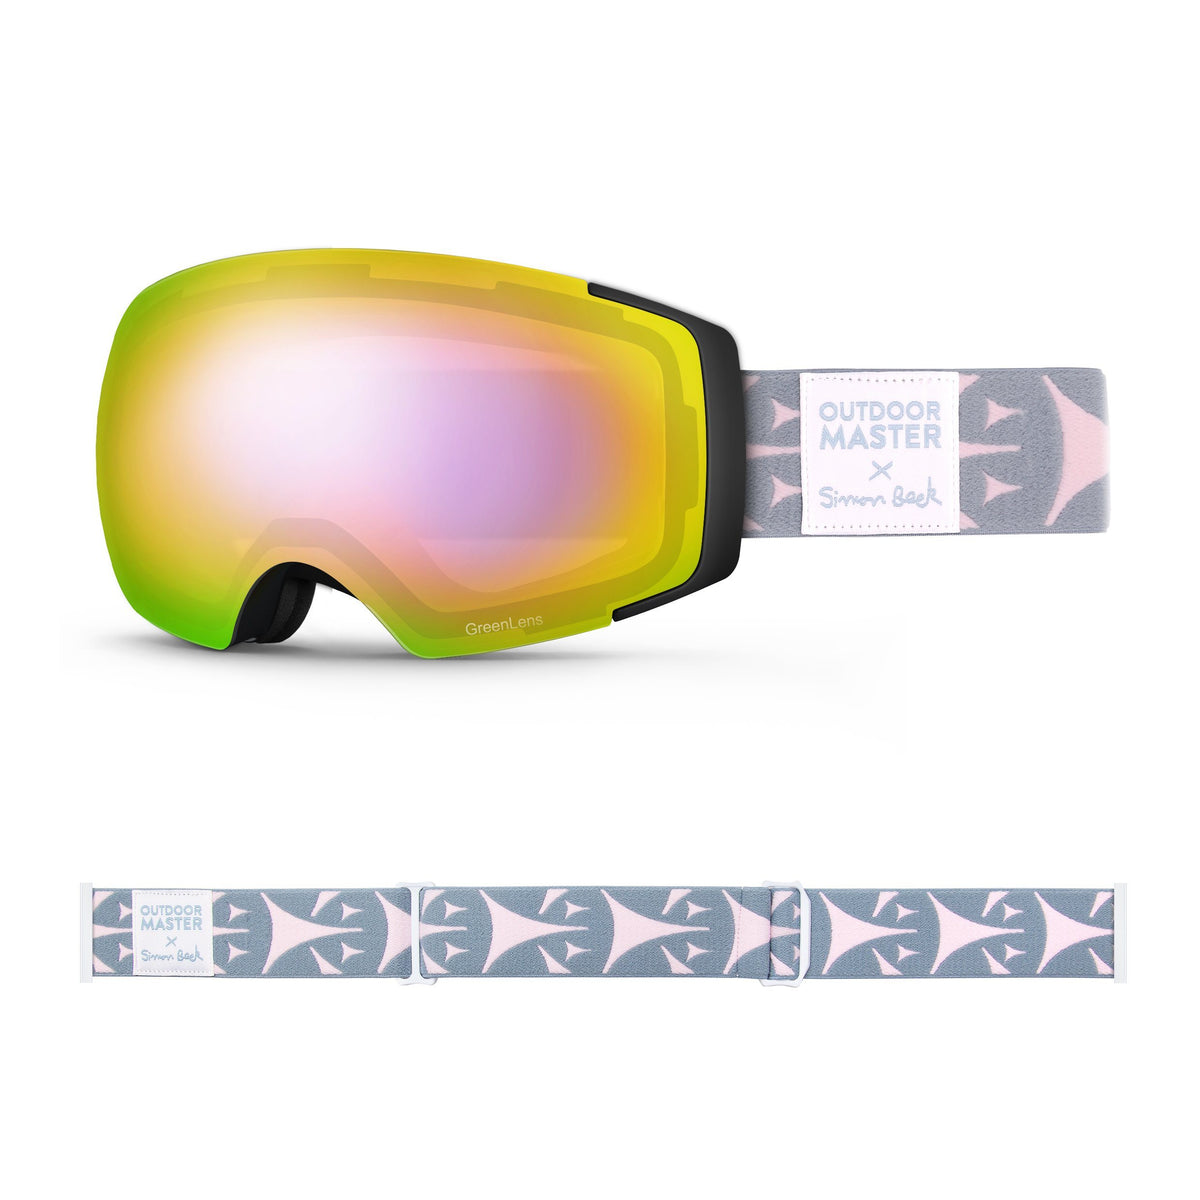 OutdoorMaster x Simon Beck Ski Goggles Pro Series - Snowshoeing Art Limited Edition OutdoorMaster GreenLens VLT 45% TAC Purple with REVO Red Polarized Bouncy Triangles